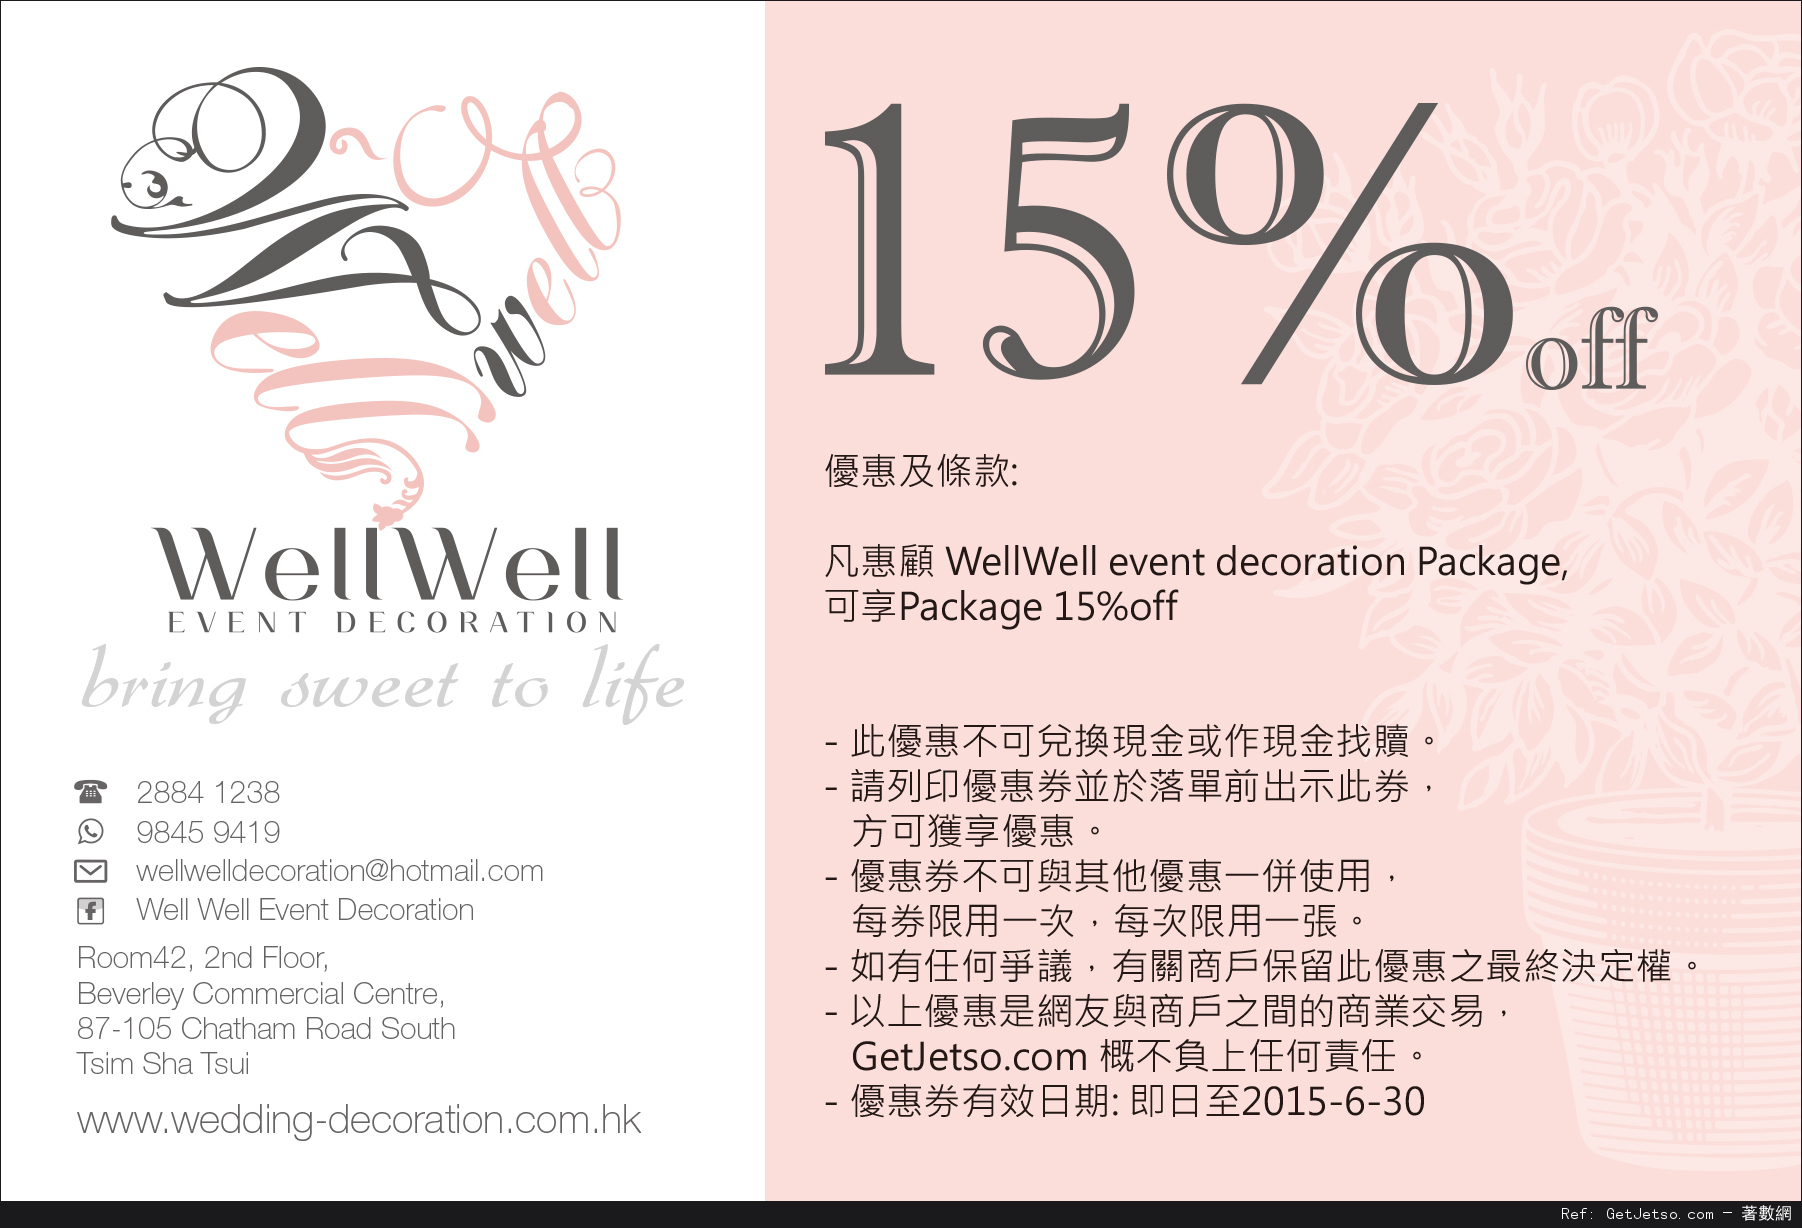 Well Well event decoration 婚禮場地佈置套餐85折優惠券(至15年6月30日)圖片1